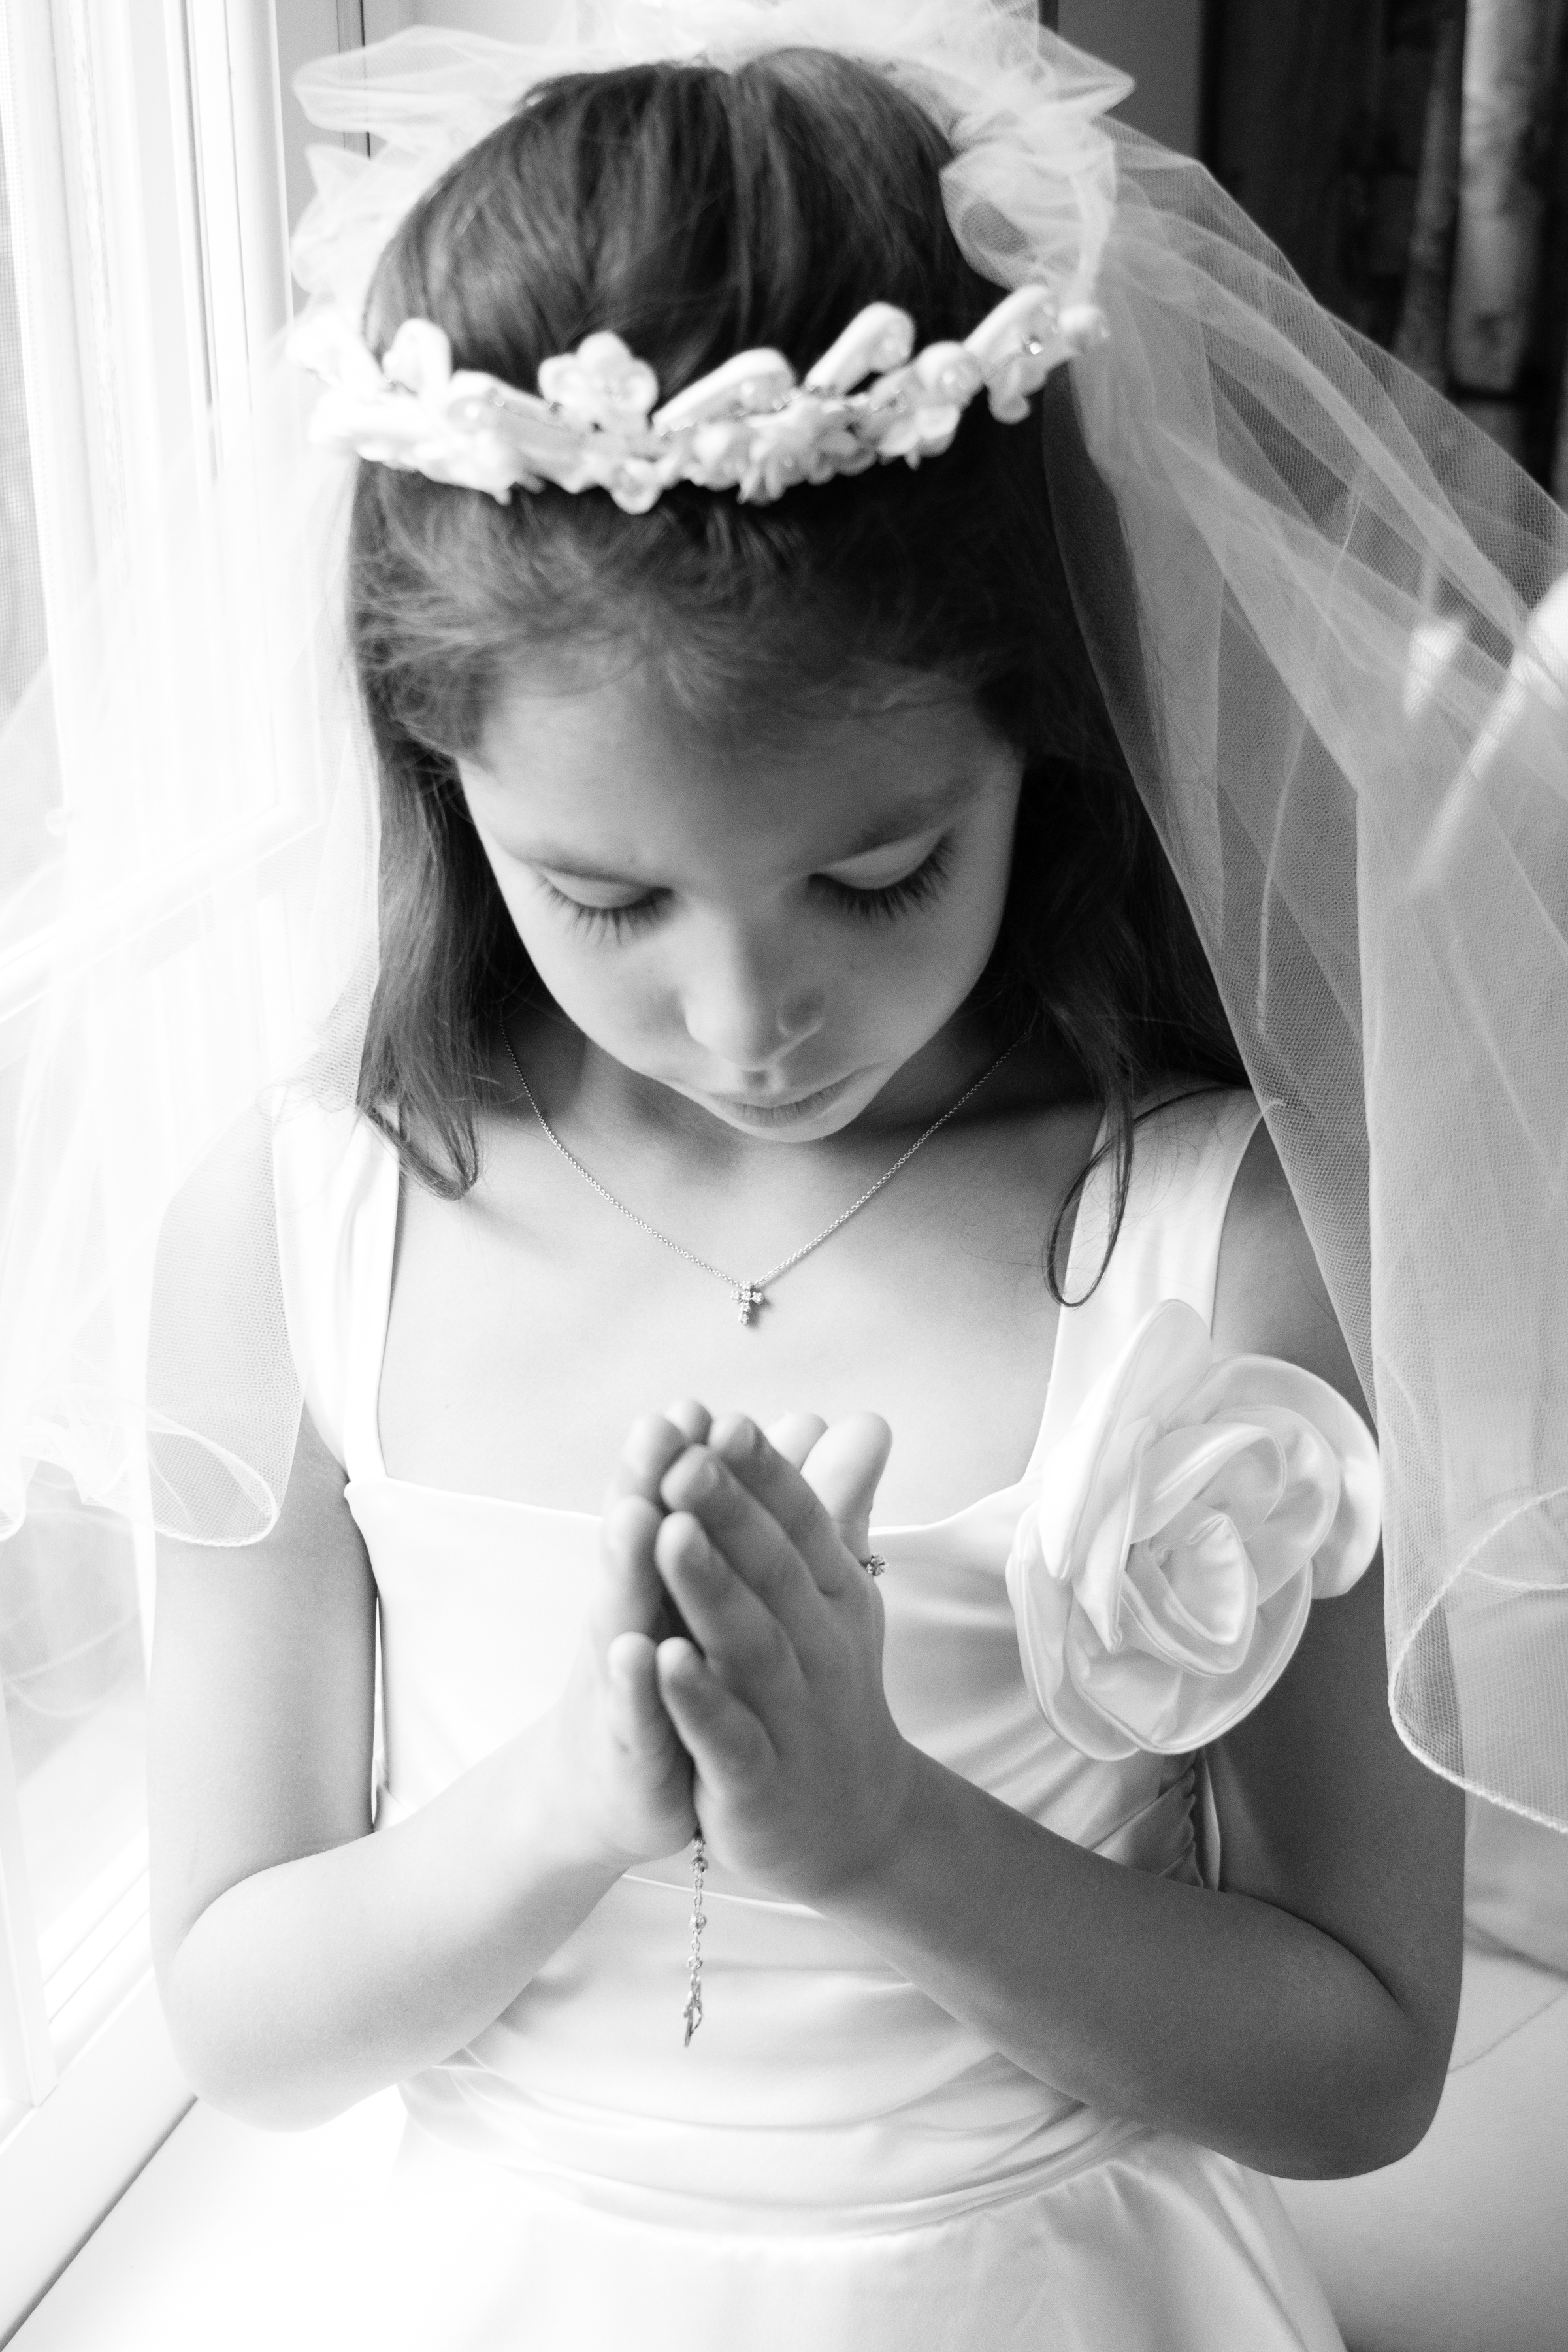 Special Event Photography, Event Photography, lifestyle photography, memorable moments, special moments, friends and family memories, lifetime memories, first communion